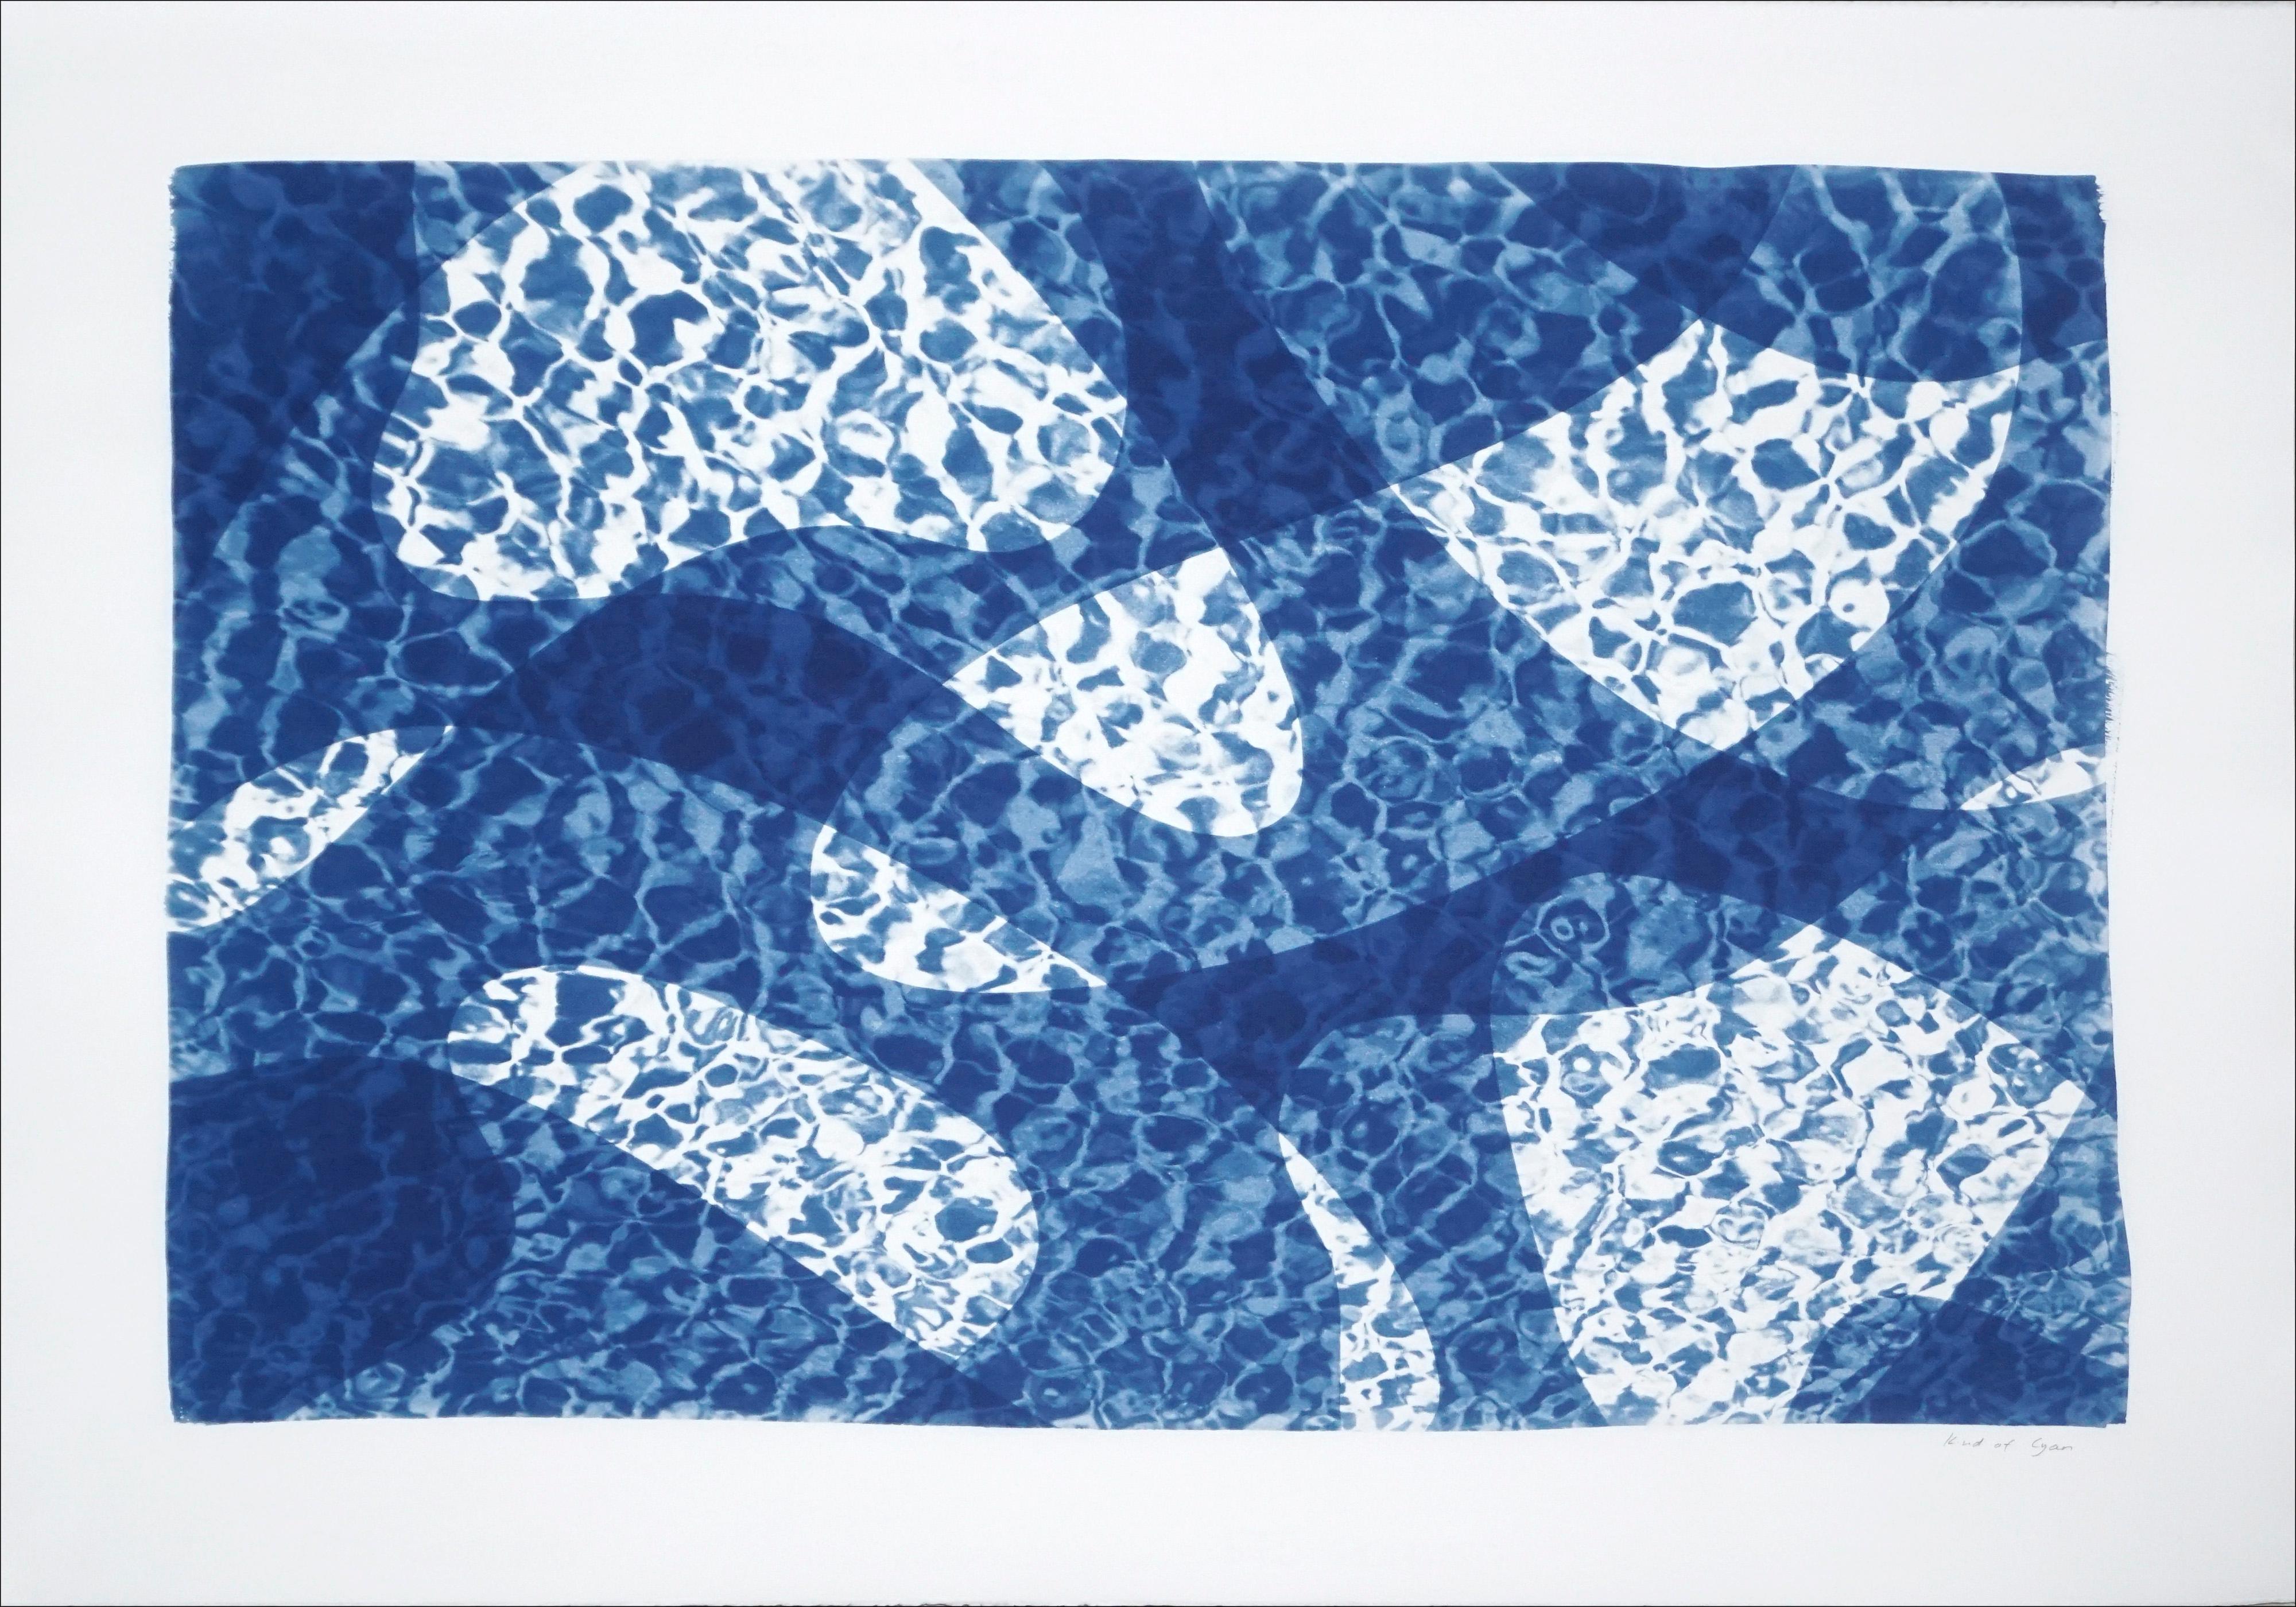 Kind of Cyan Abstract Print - Water Reflection of Fish Under Water, Pool Monotype Cyanotype in Blue Tones